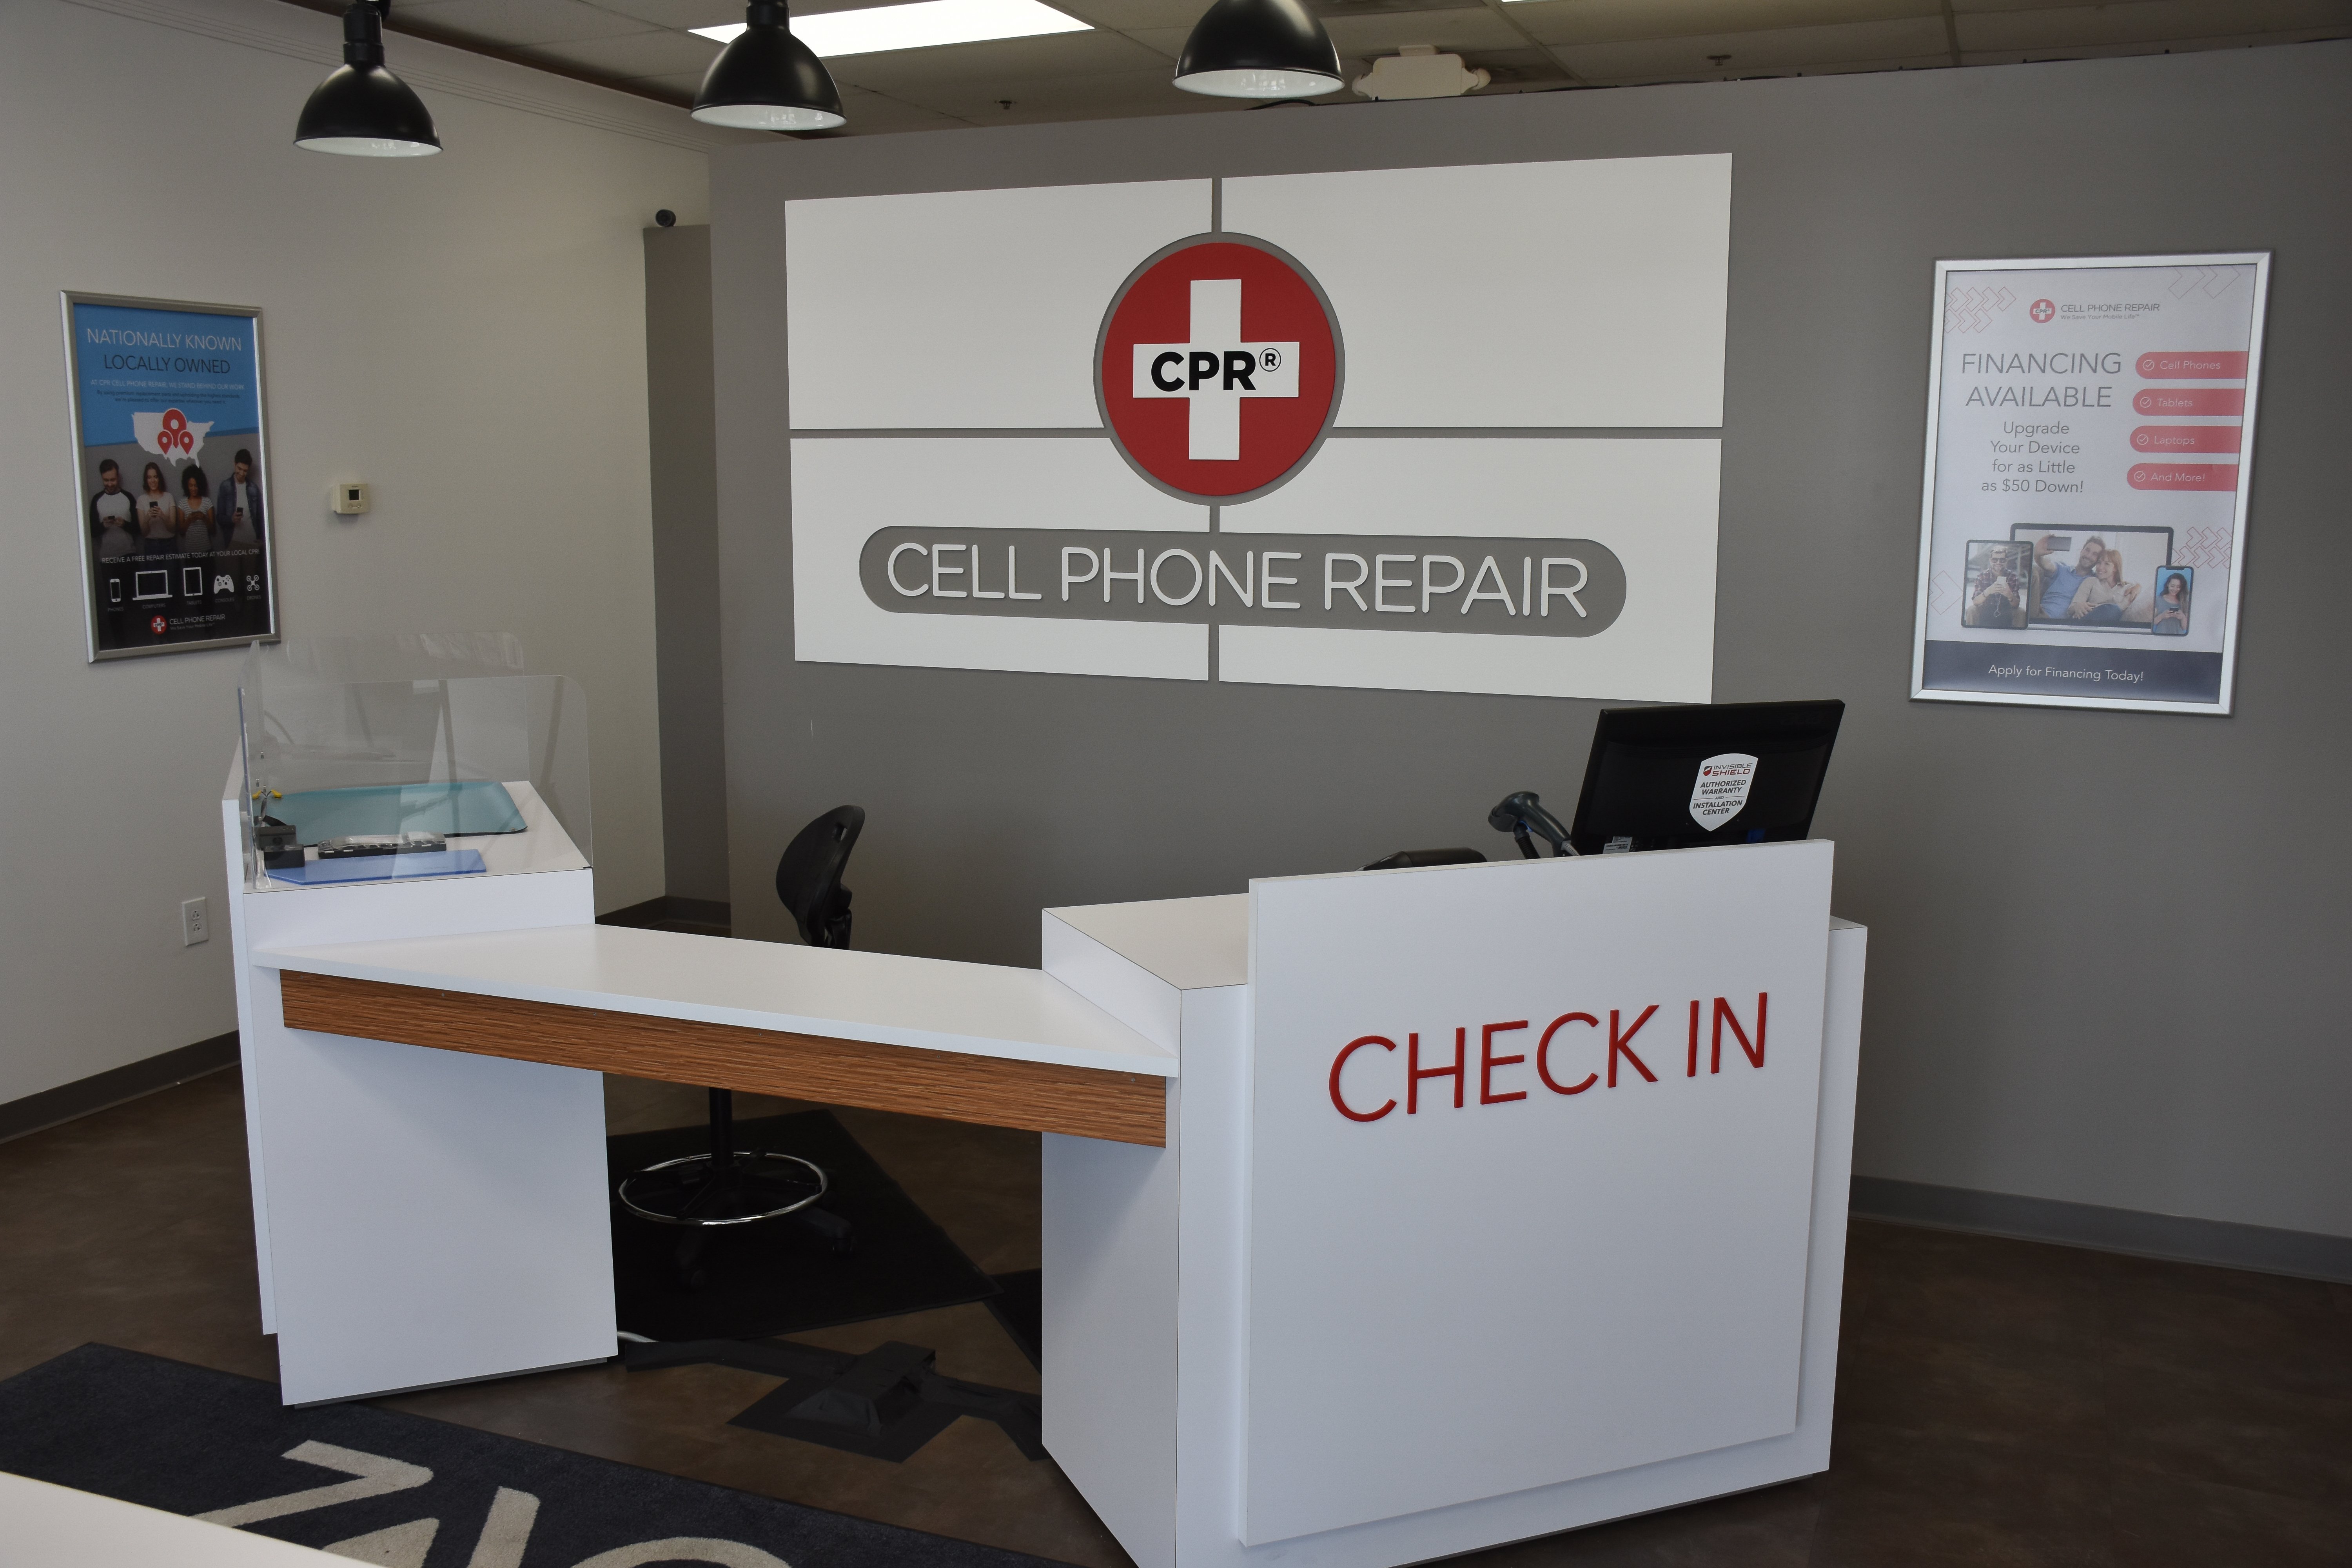 CPR Cell Phone Repair, Monday, May 3, 2021, Press release picture